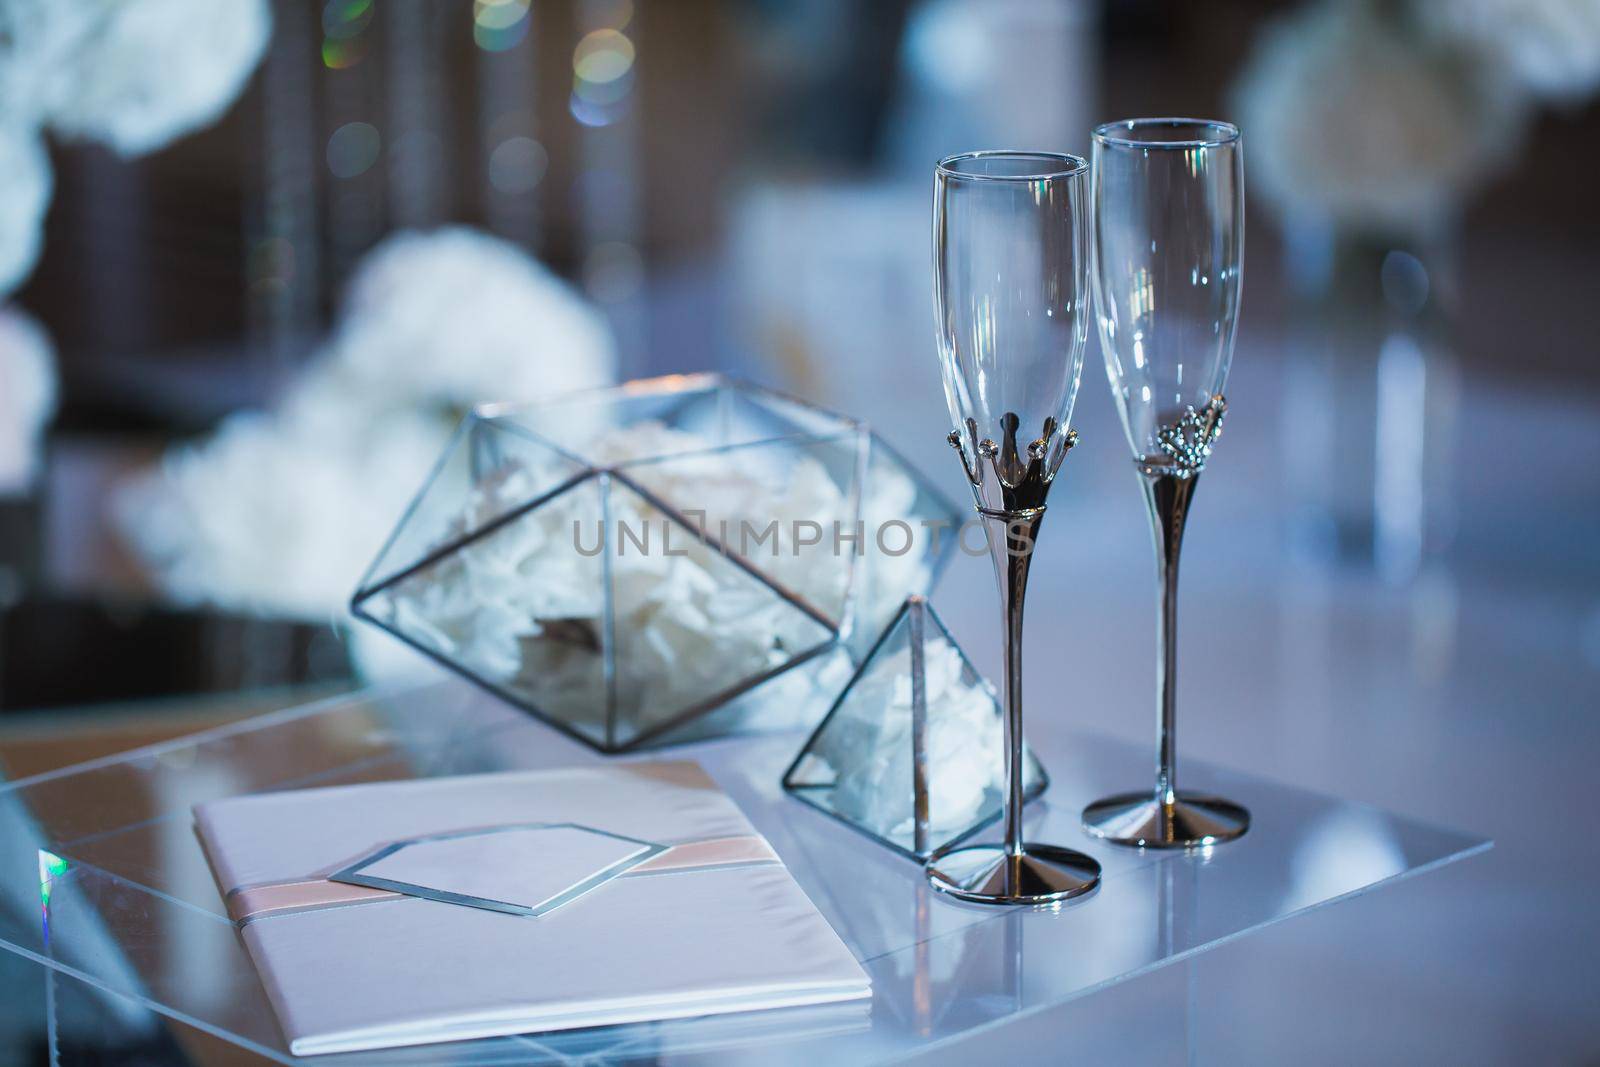 Wedding glasses at the registration Desk on-site ceremony by StudioPeace